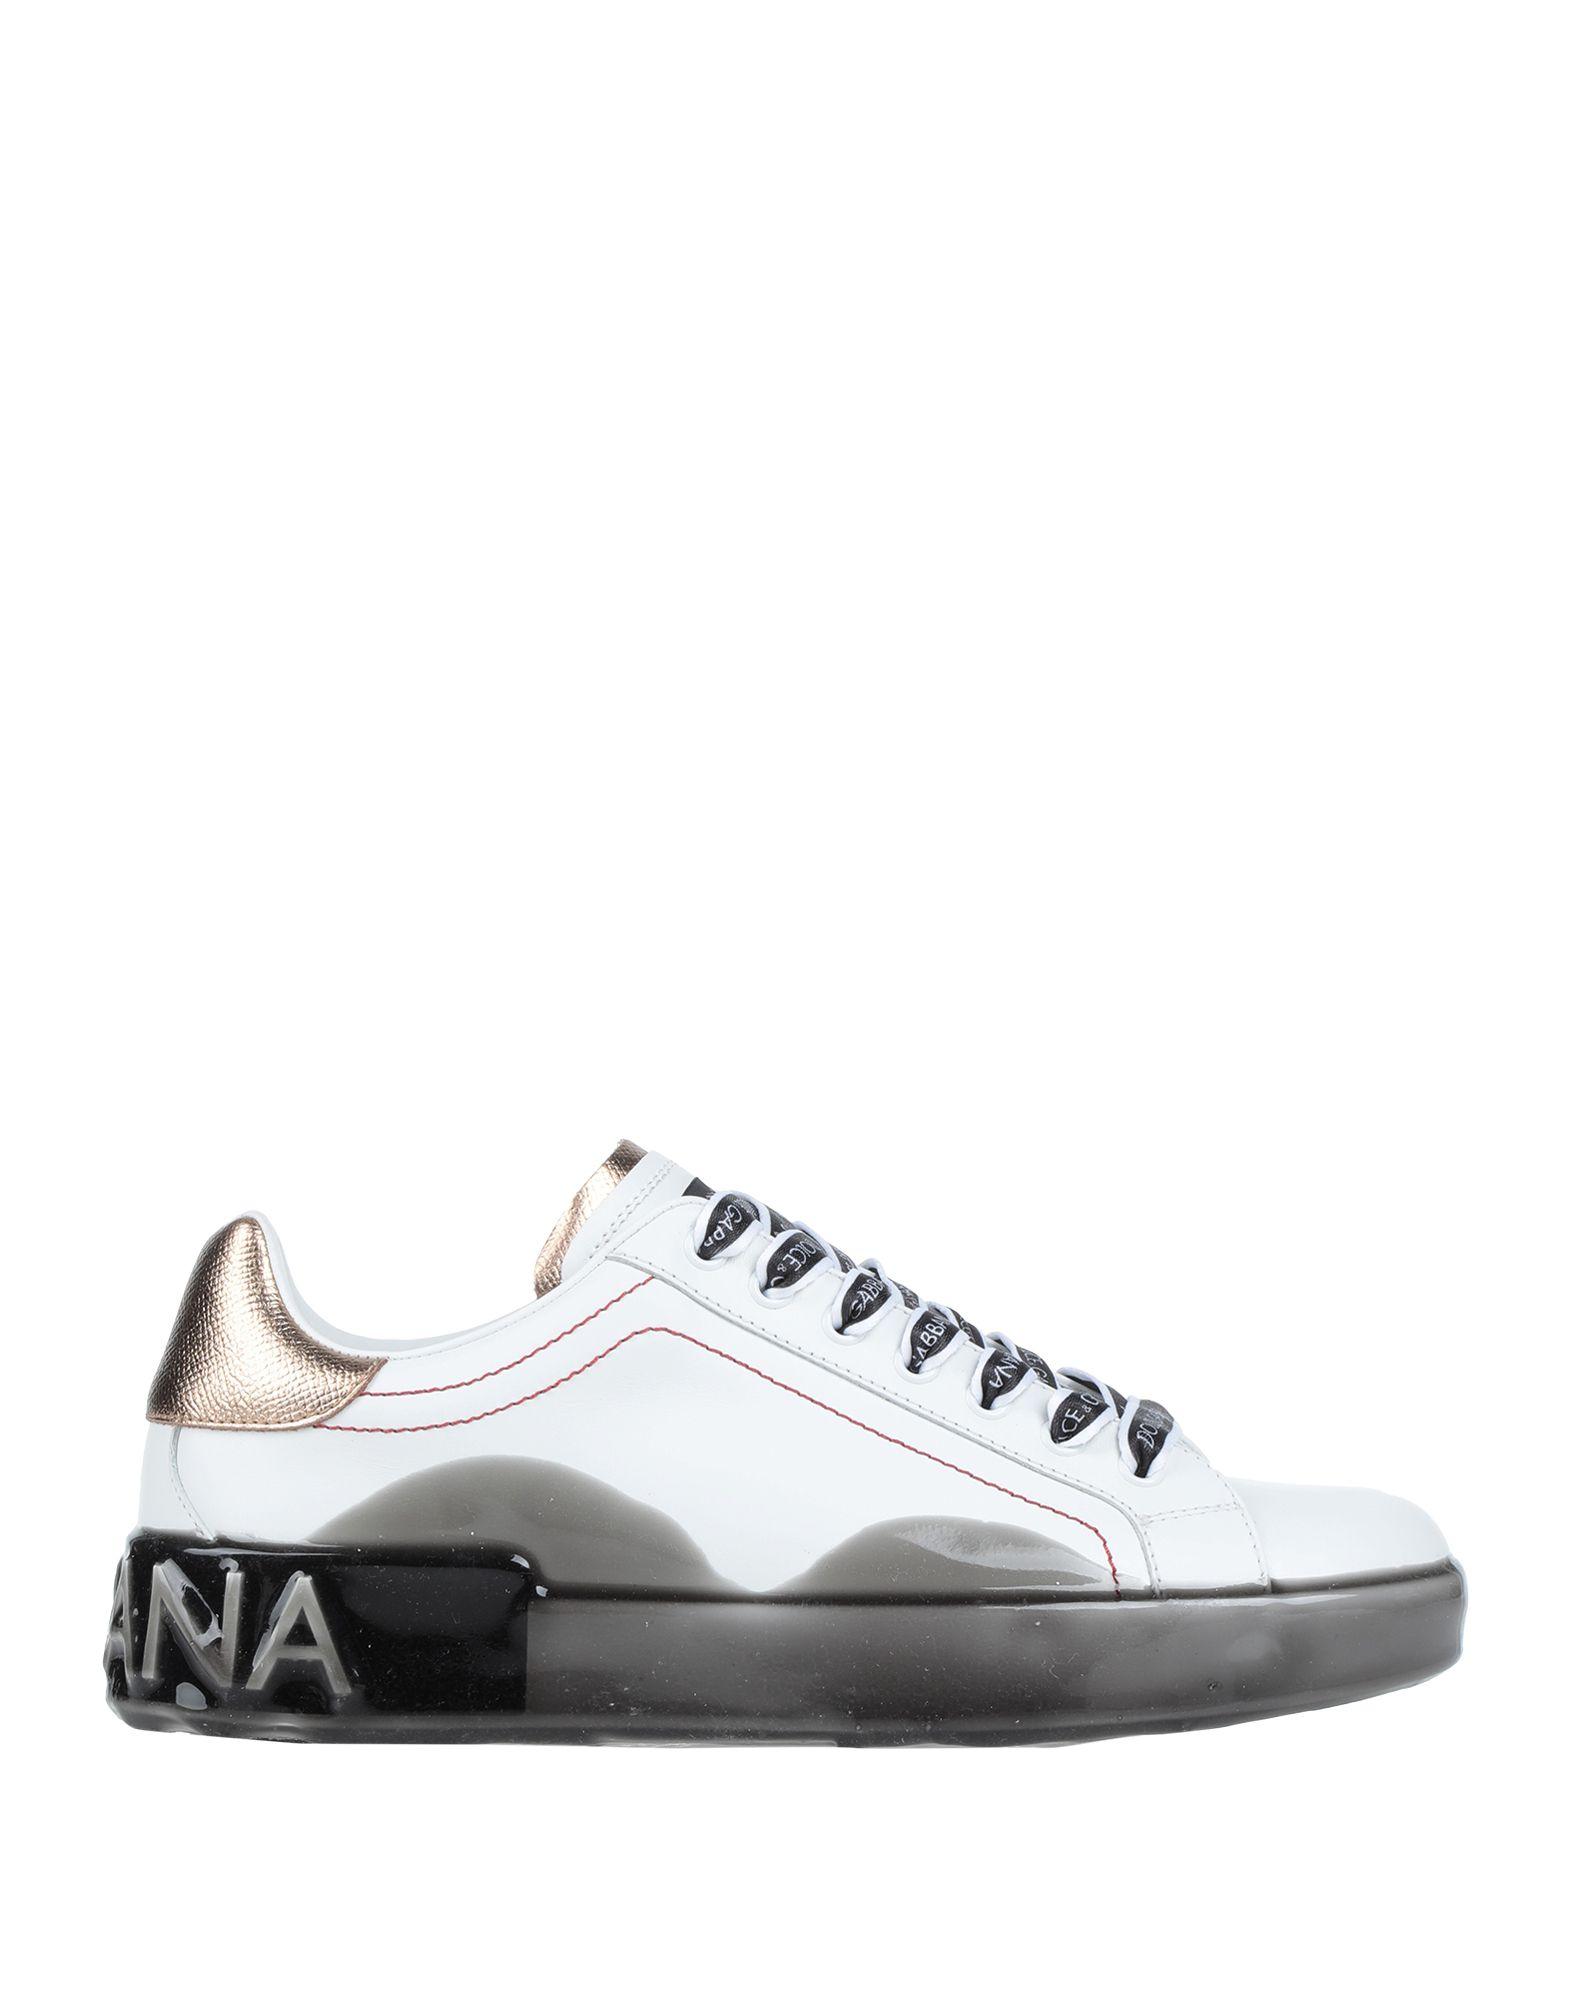 Dolce & Gabbana Leather Low-tops & Sneakers in White for Men - Lyst